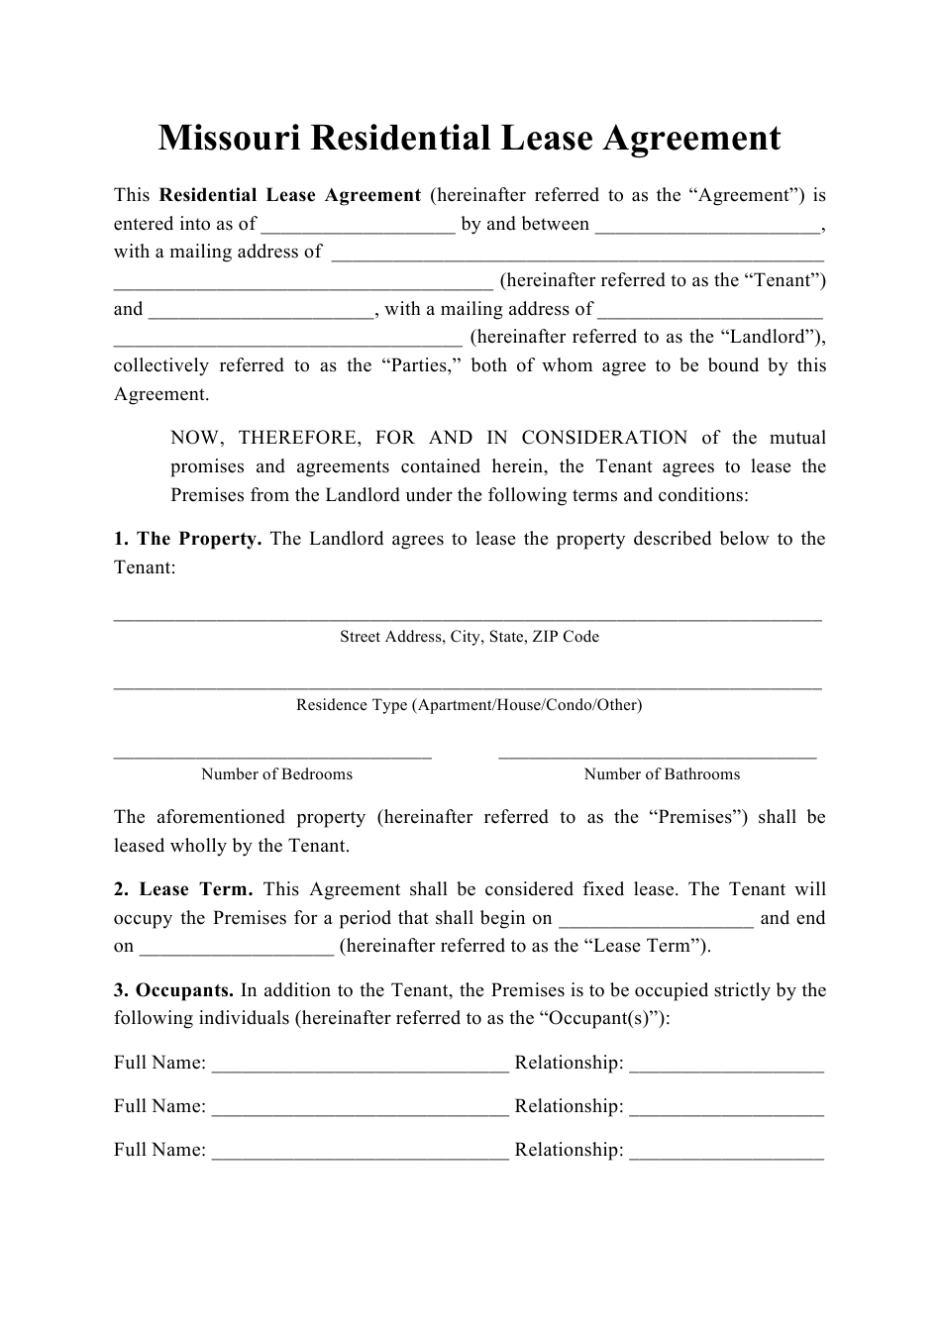 Missouri Residential Lease Agreement Template Download Printable Pdf Throughout Free Printable Residential Lease Agreement Template